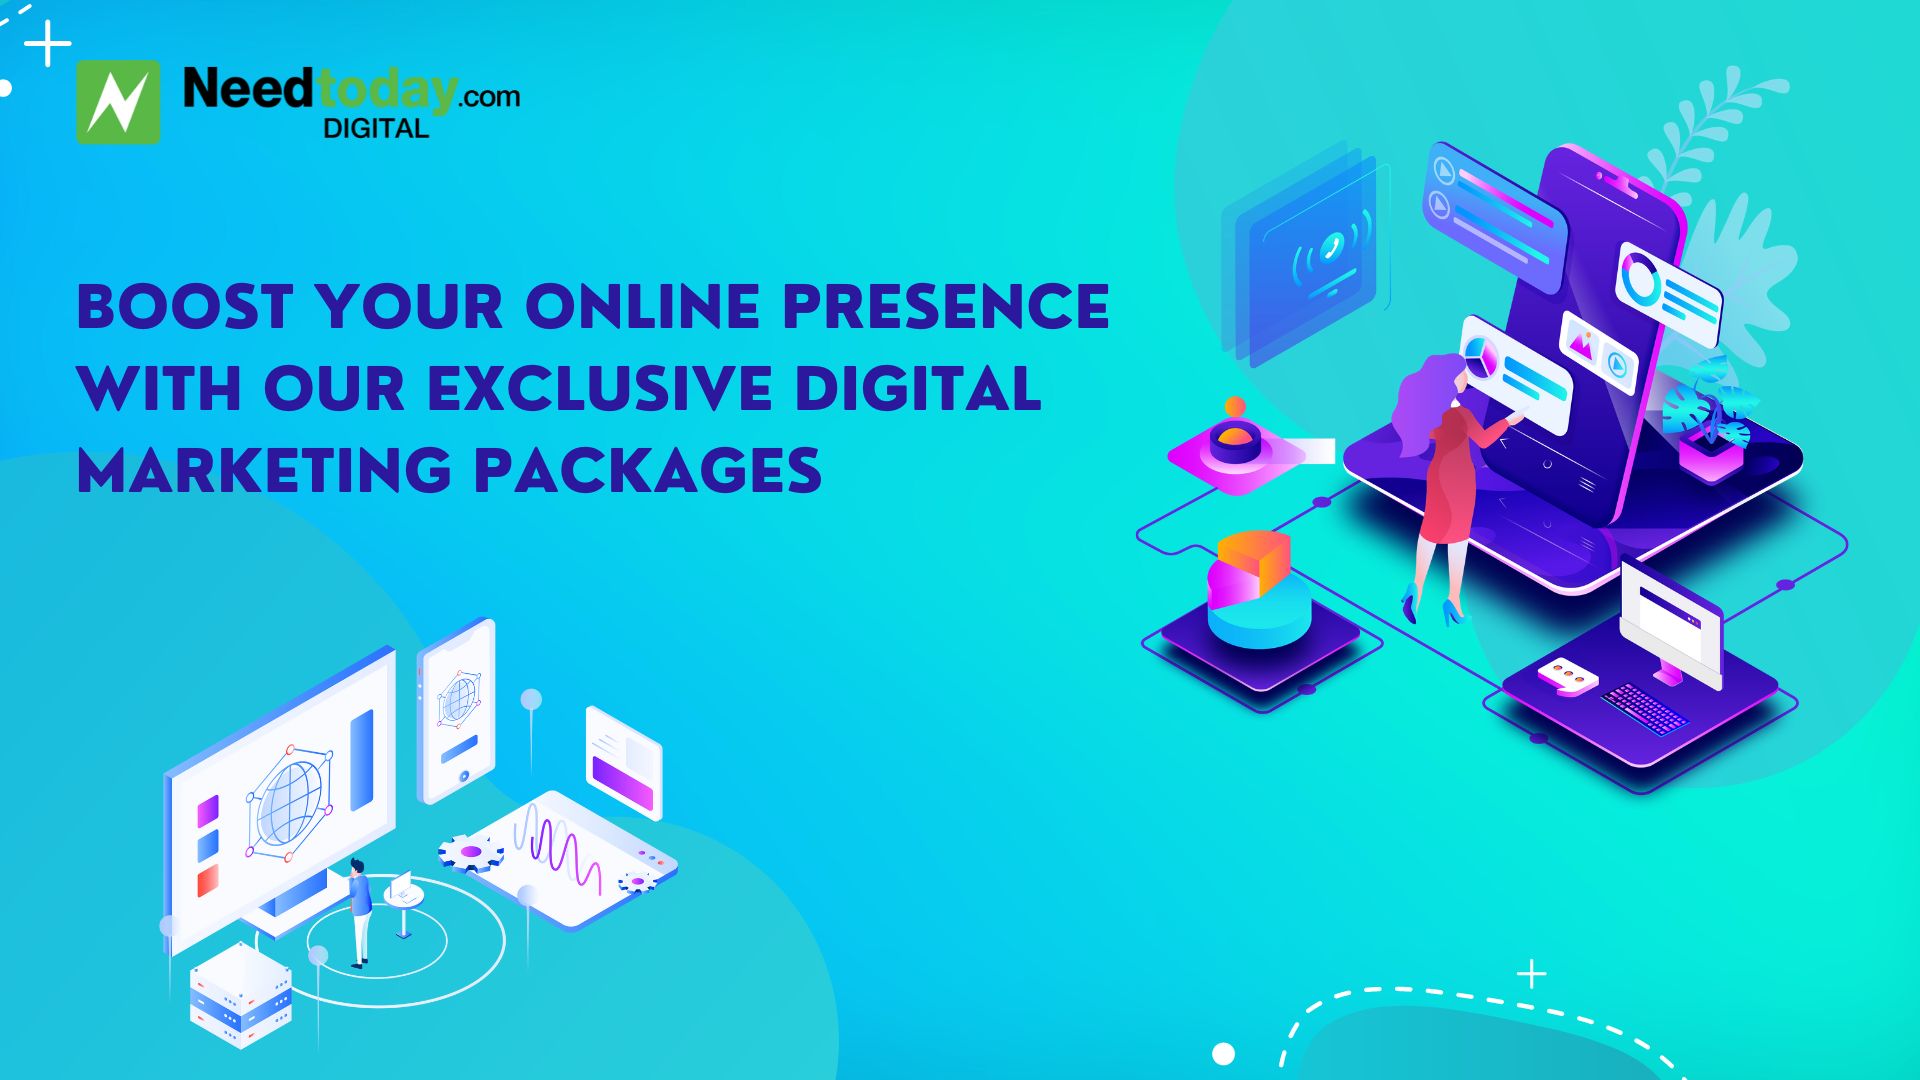 Boost Your Online Presence with Our Exclusive Digital Marketing Packages